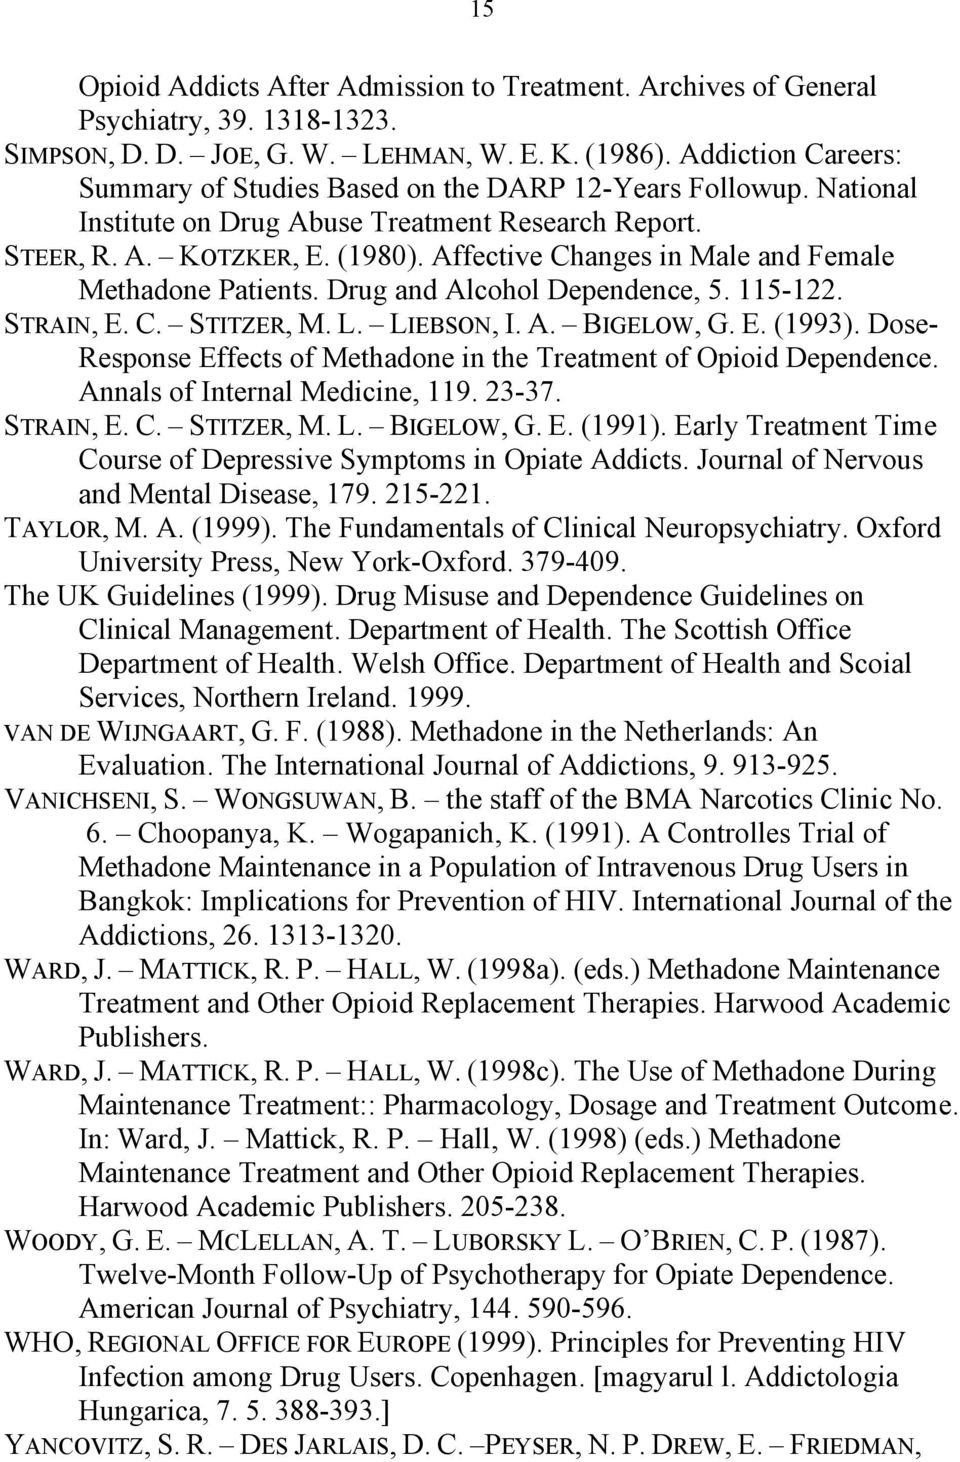 Affective Changes in Male and Female Methadone Patients. Drug and Alcohol Dependence, 5. 115-122. STRAIN, E. C. STITZER, M. L. LIEBSON, I. A. BIGELOW, G. E. (1993).